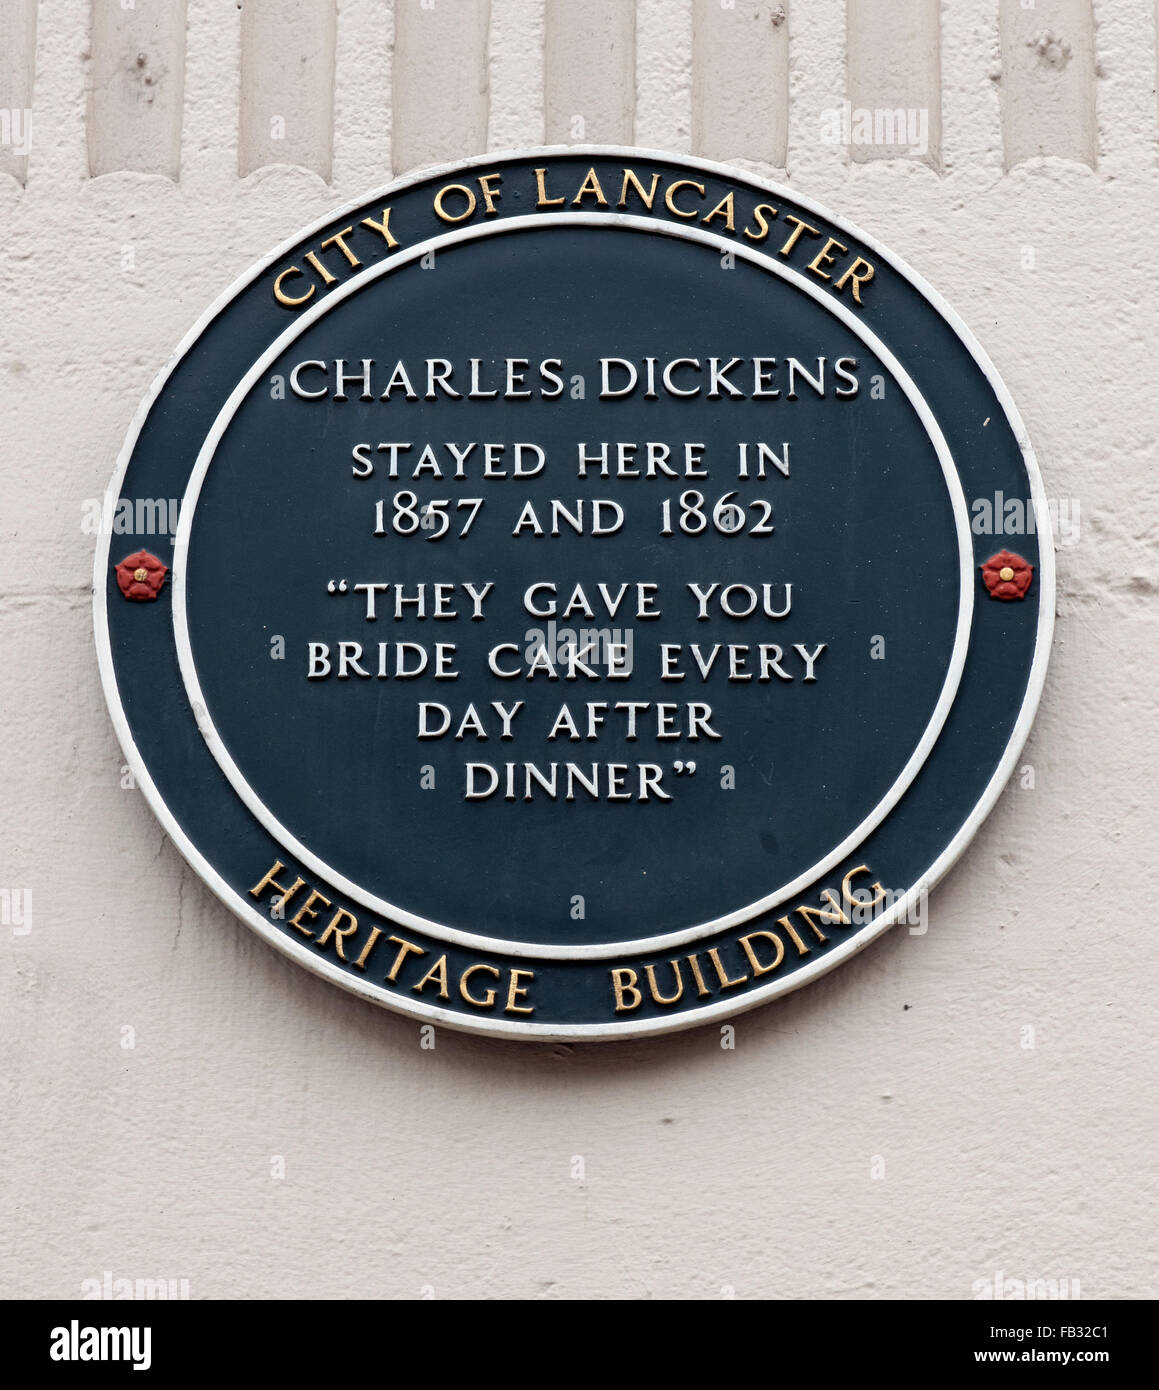 Historic plaque for 'Charles Dickens' at Royal Kings Arms Hotel, Lancaster, Lancashire, England, UK. Stock Photo